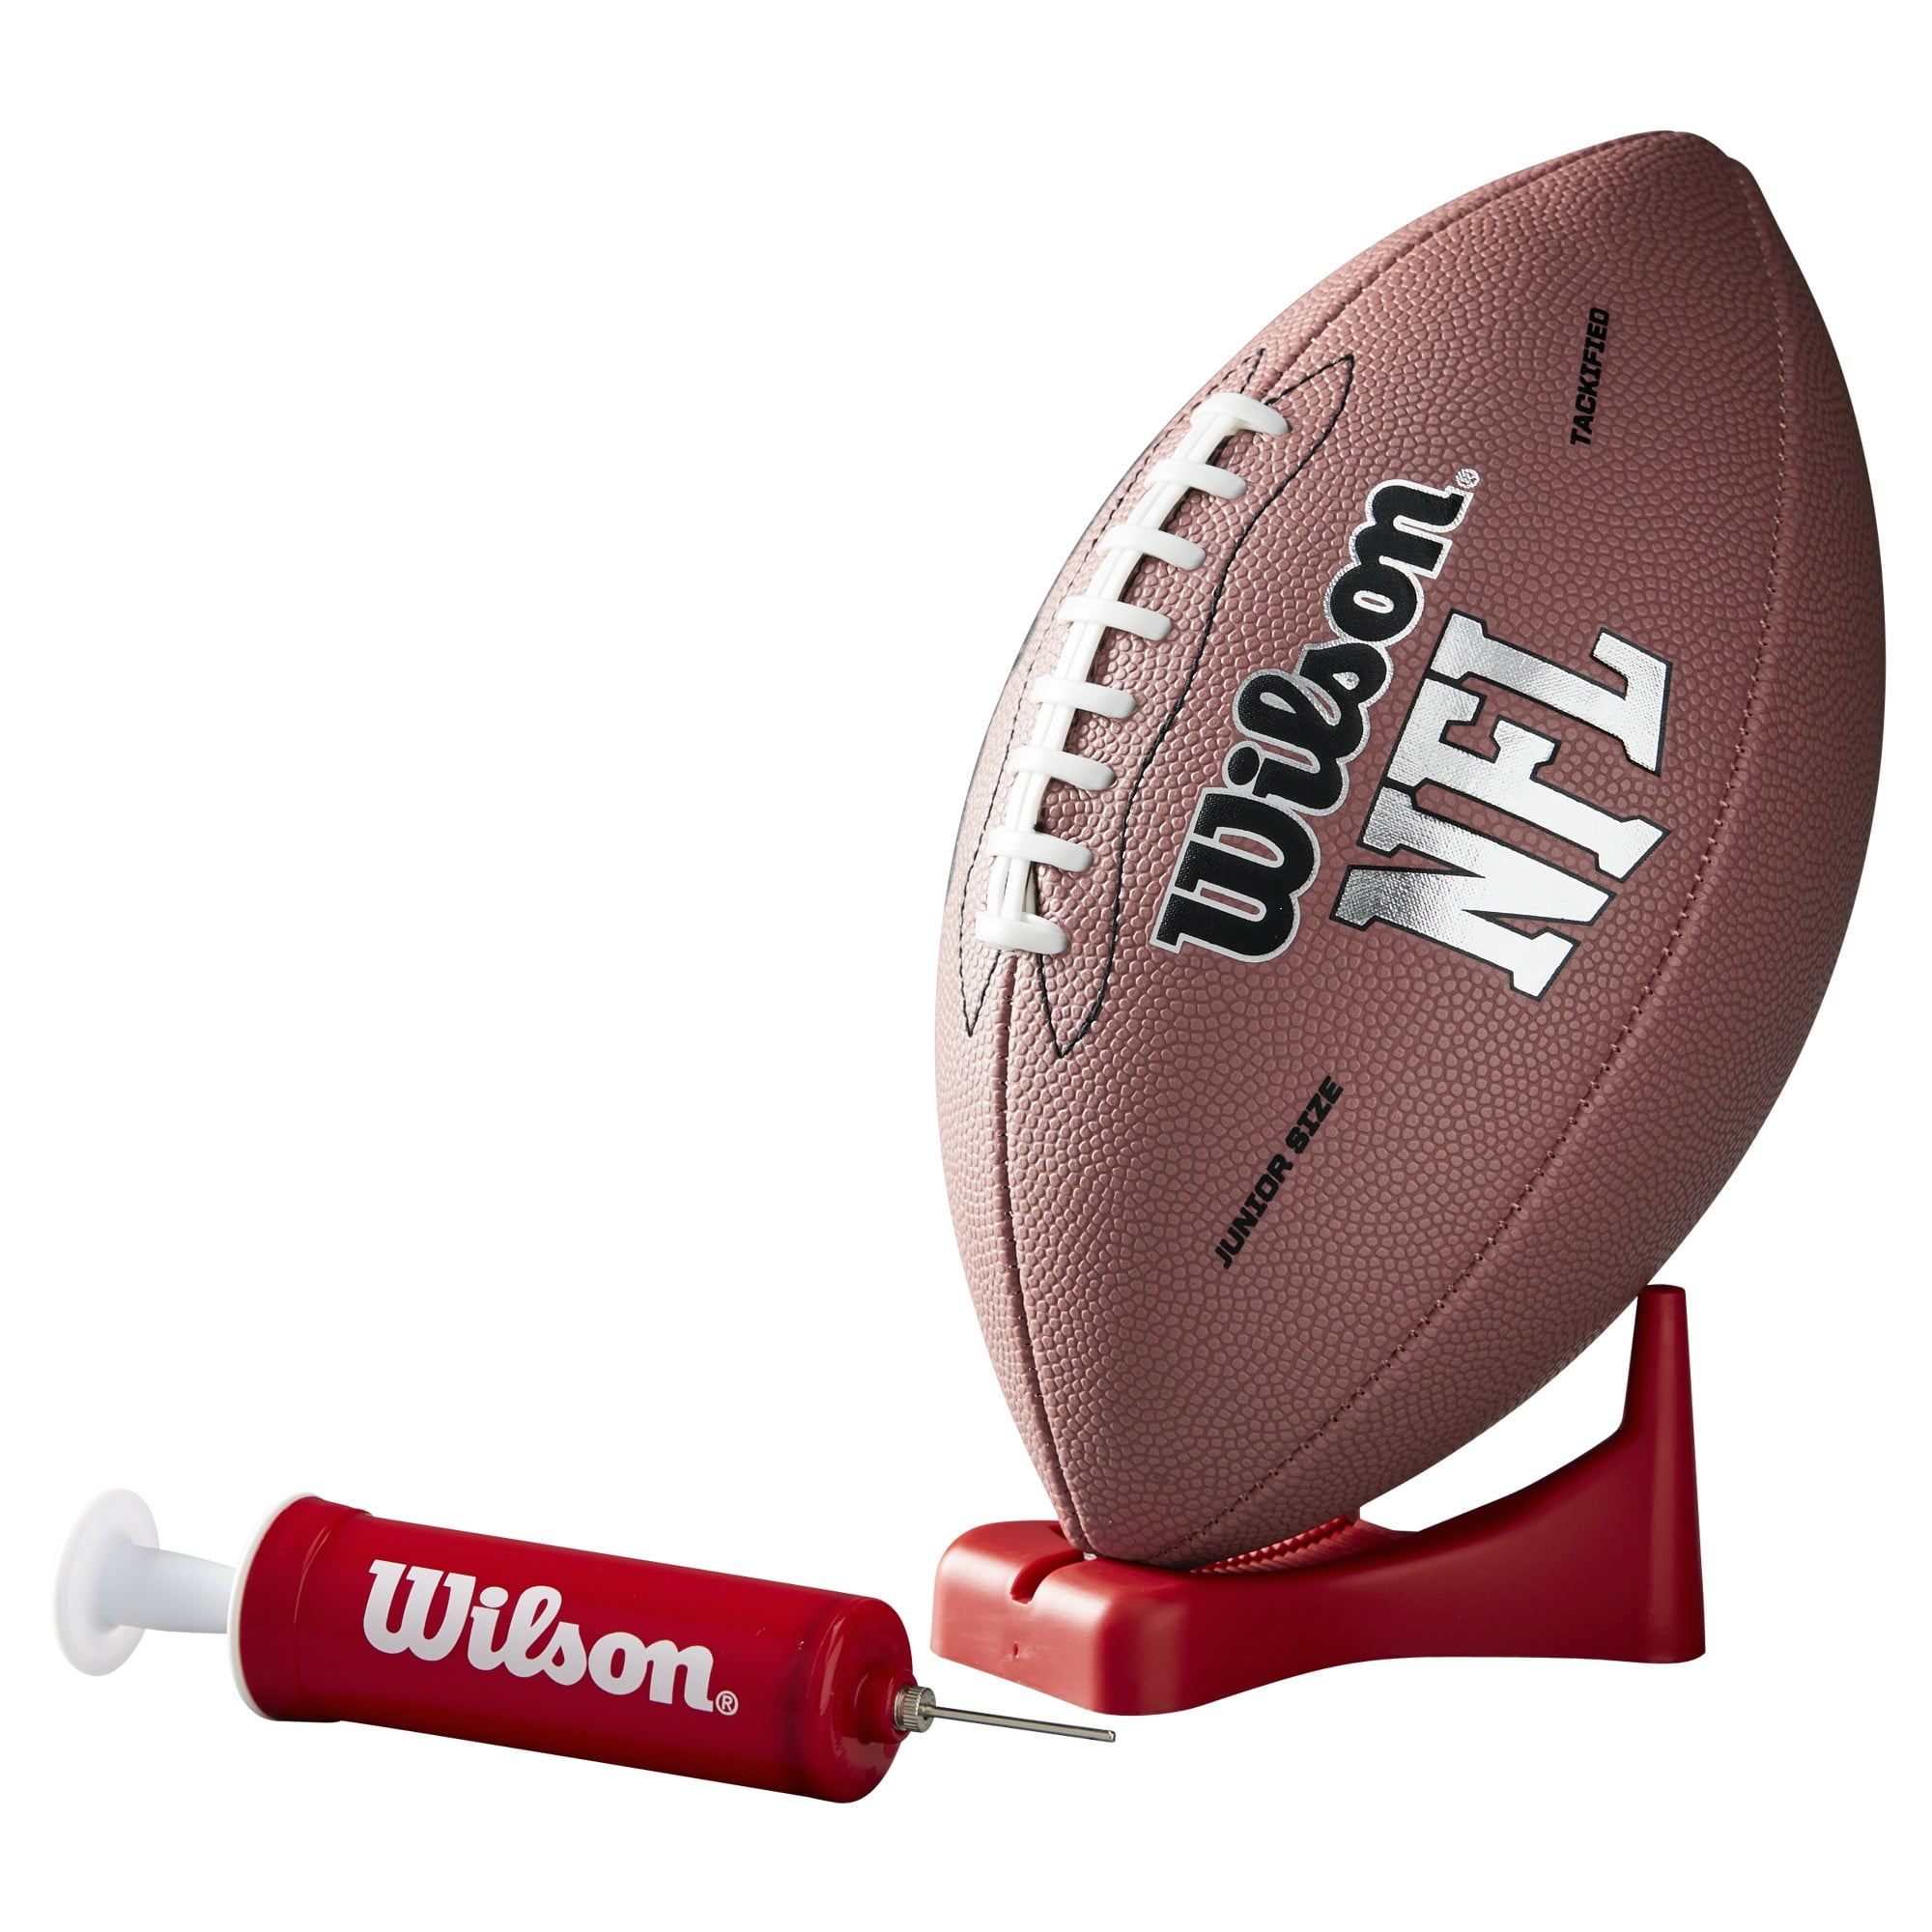 WILSON MVP INFLATED AMERICAN FOOTBALL OFFICIAL SIZE READY TO USE 